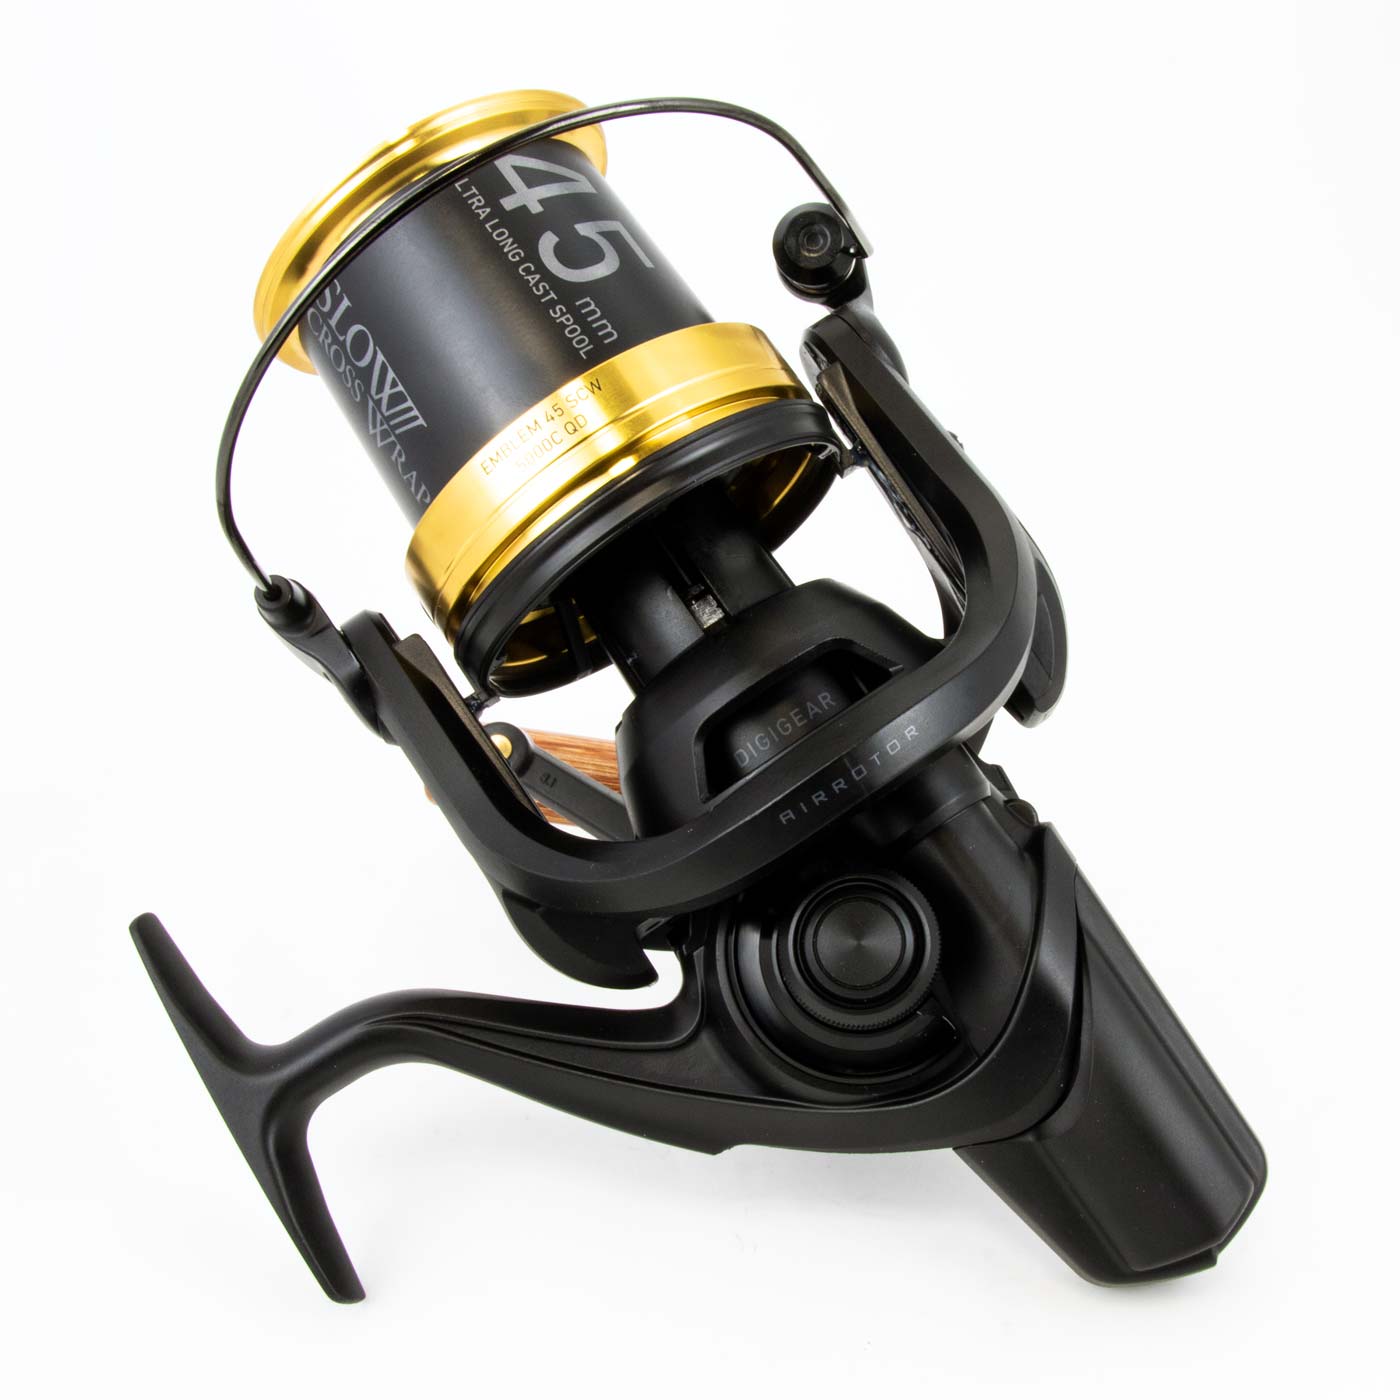 Won a set of 3 Daiwa 20 Emblem 45. can't wait to try them out : r